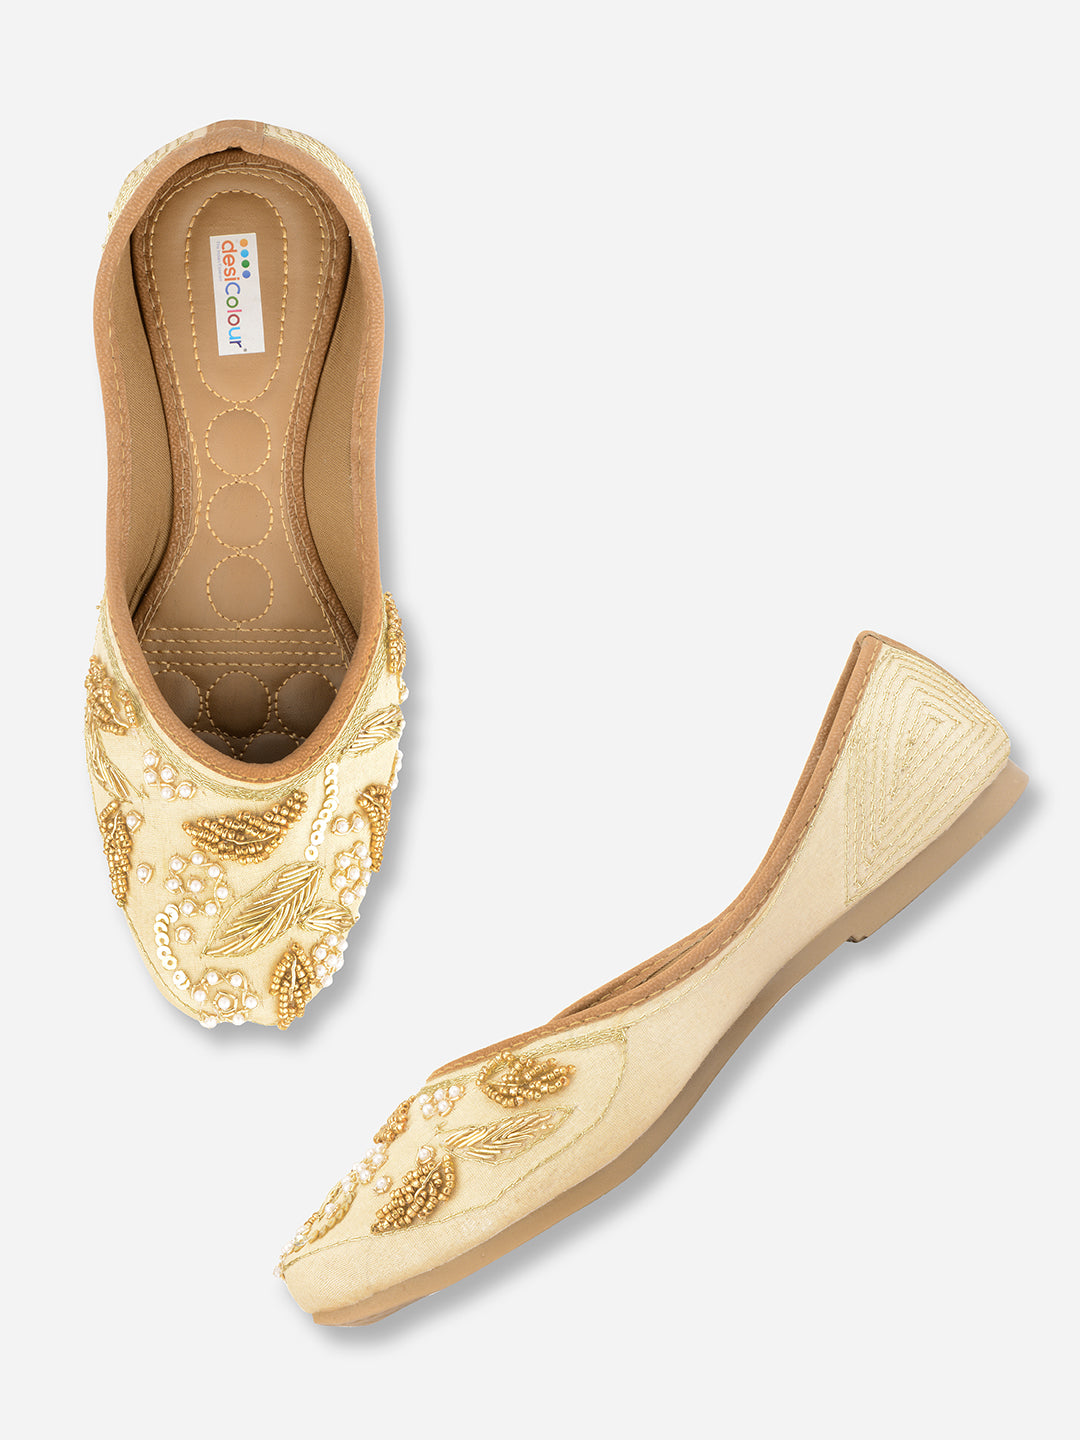 DESI COLOUR Women Gold-Toned Ethnic Ballerinas with Laser Cuts Flats